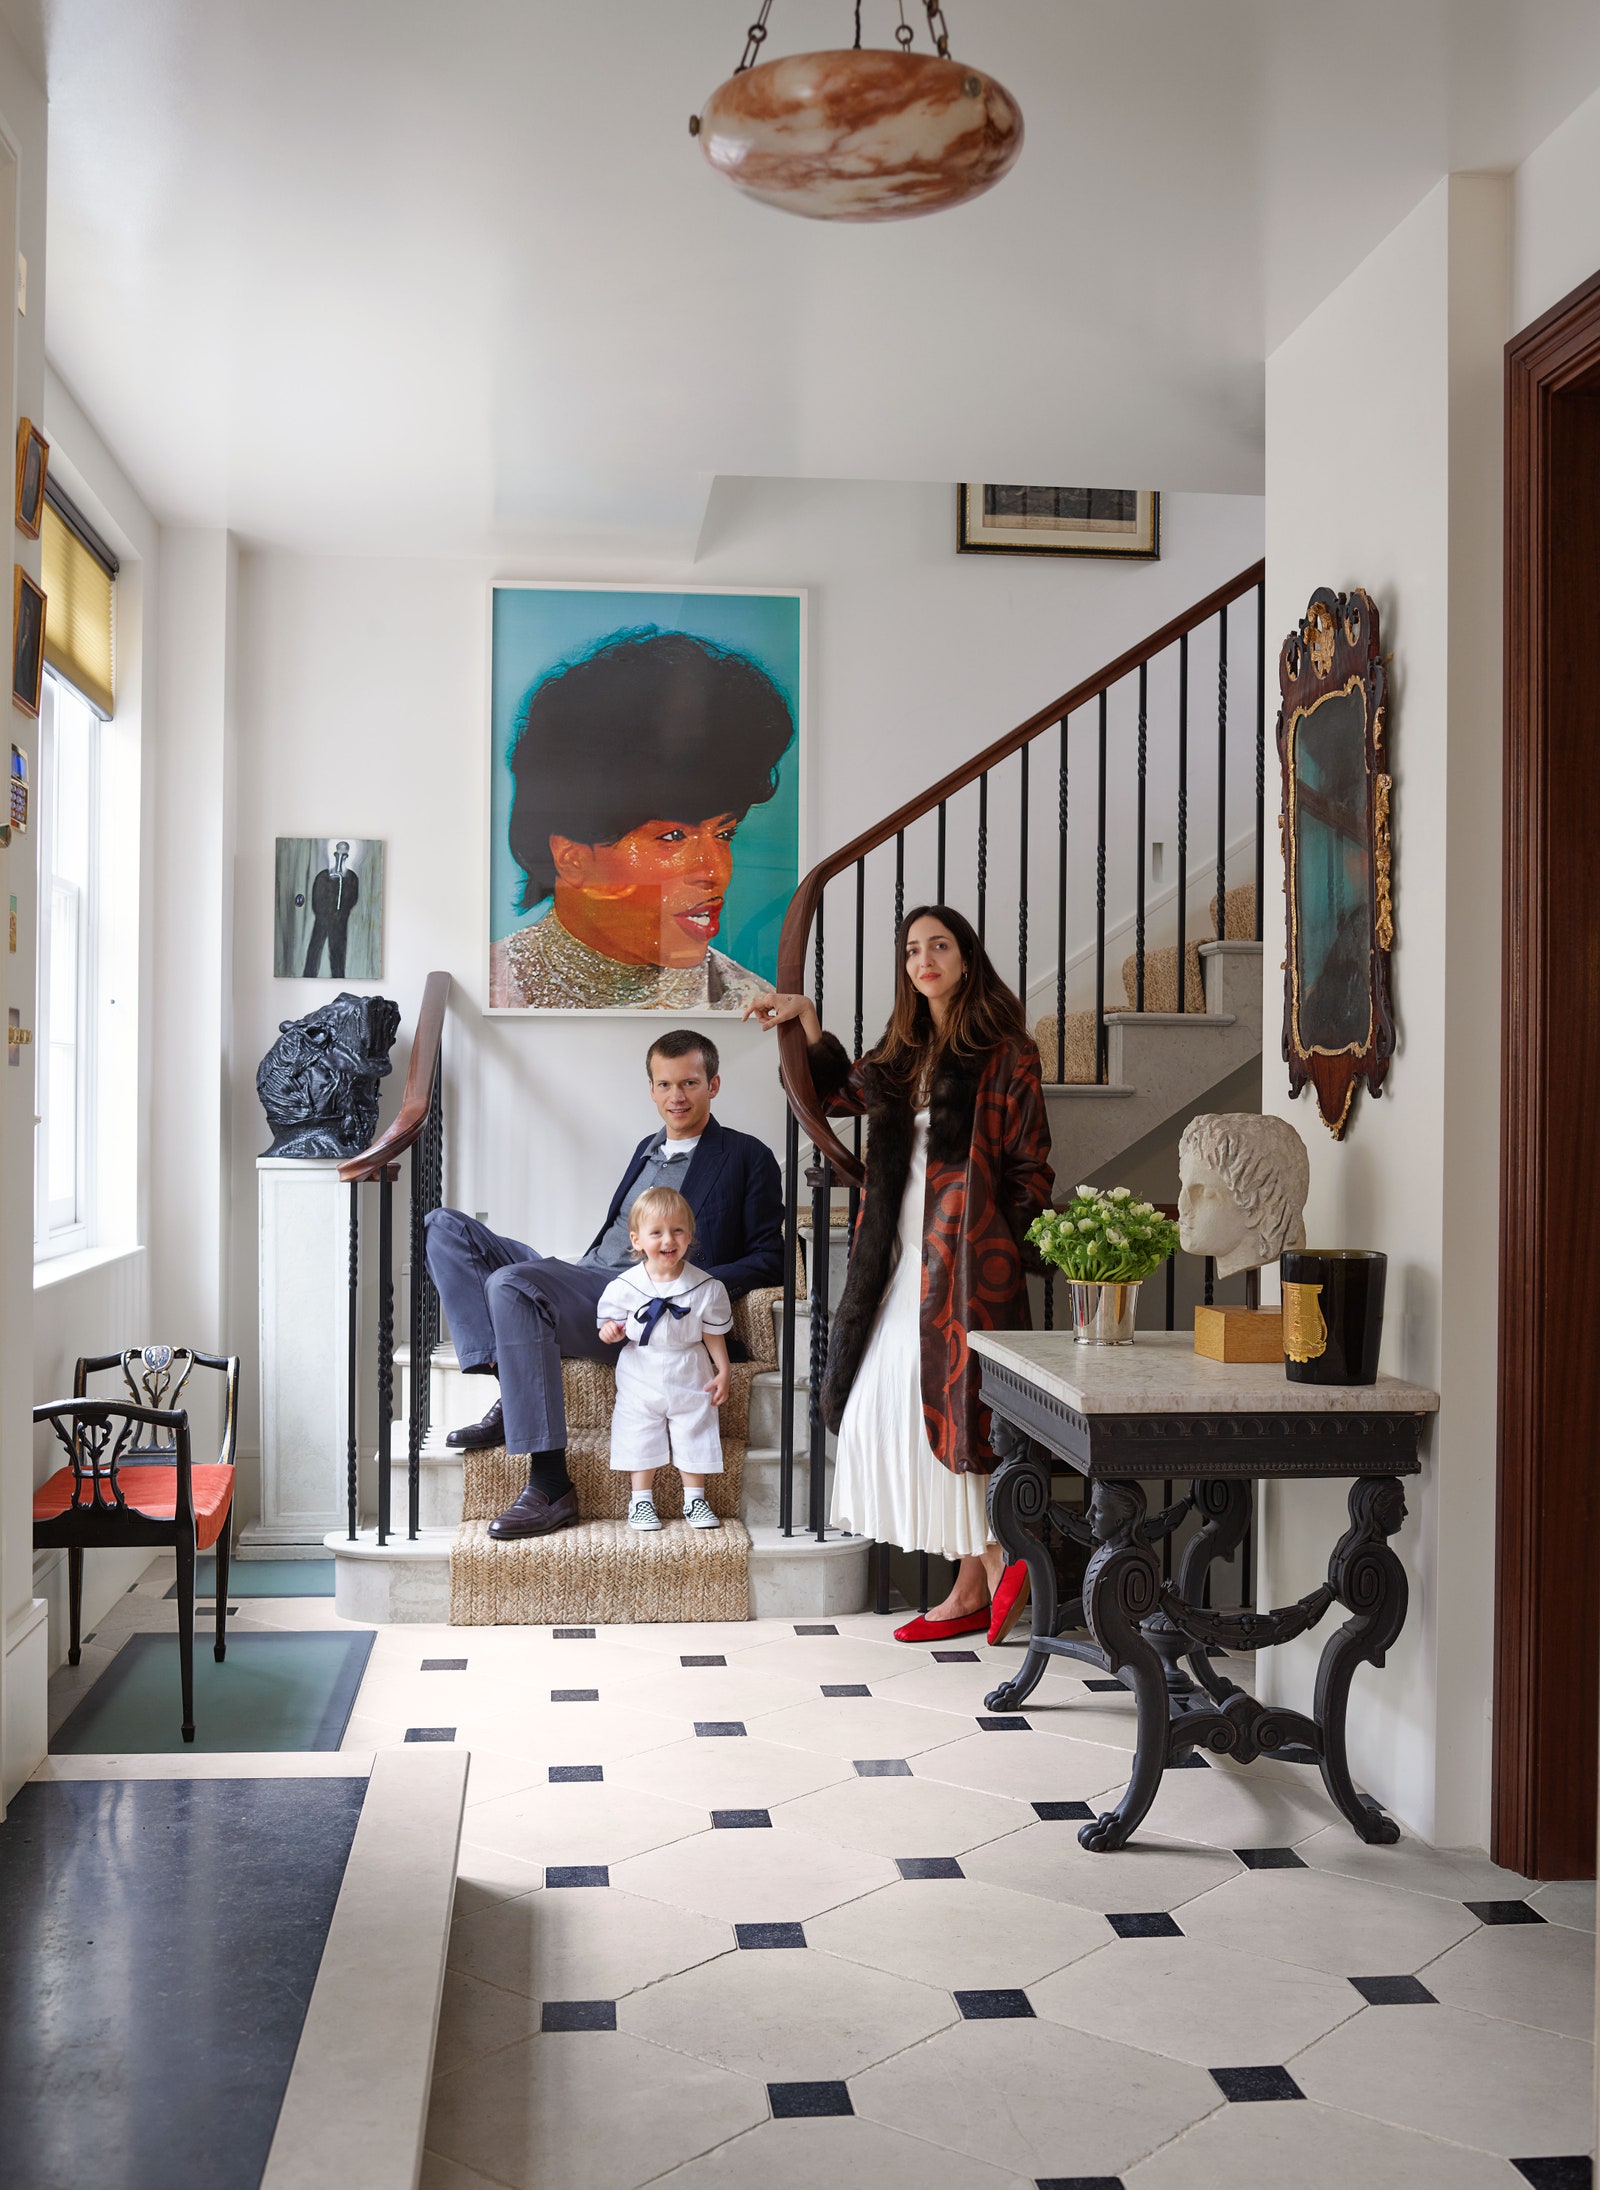 Guinness Weinstock and son Reuben in the entrance hall. The portrait of Little Richard is by Mark Leckey.